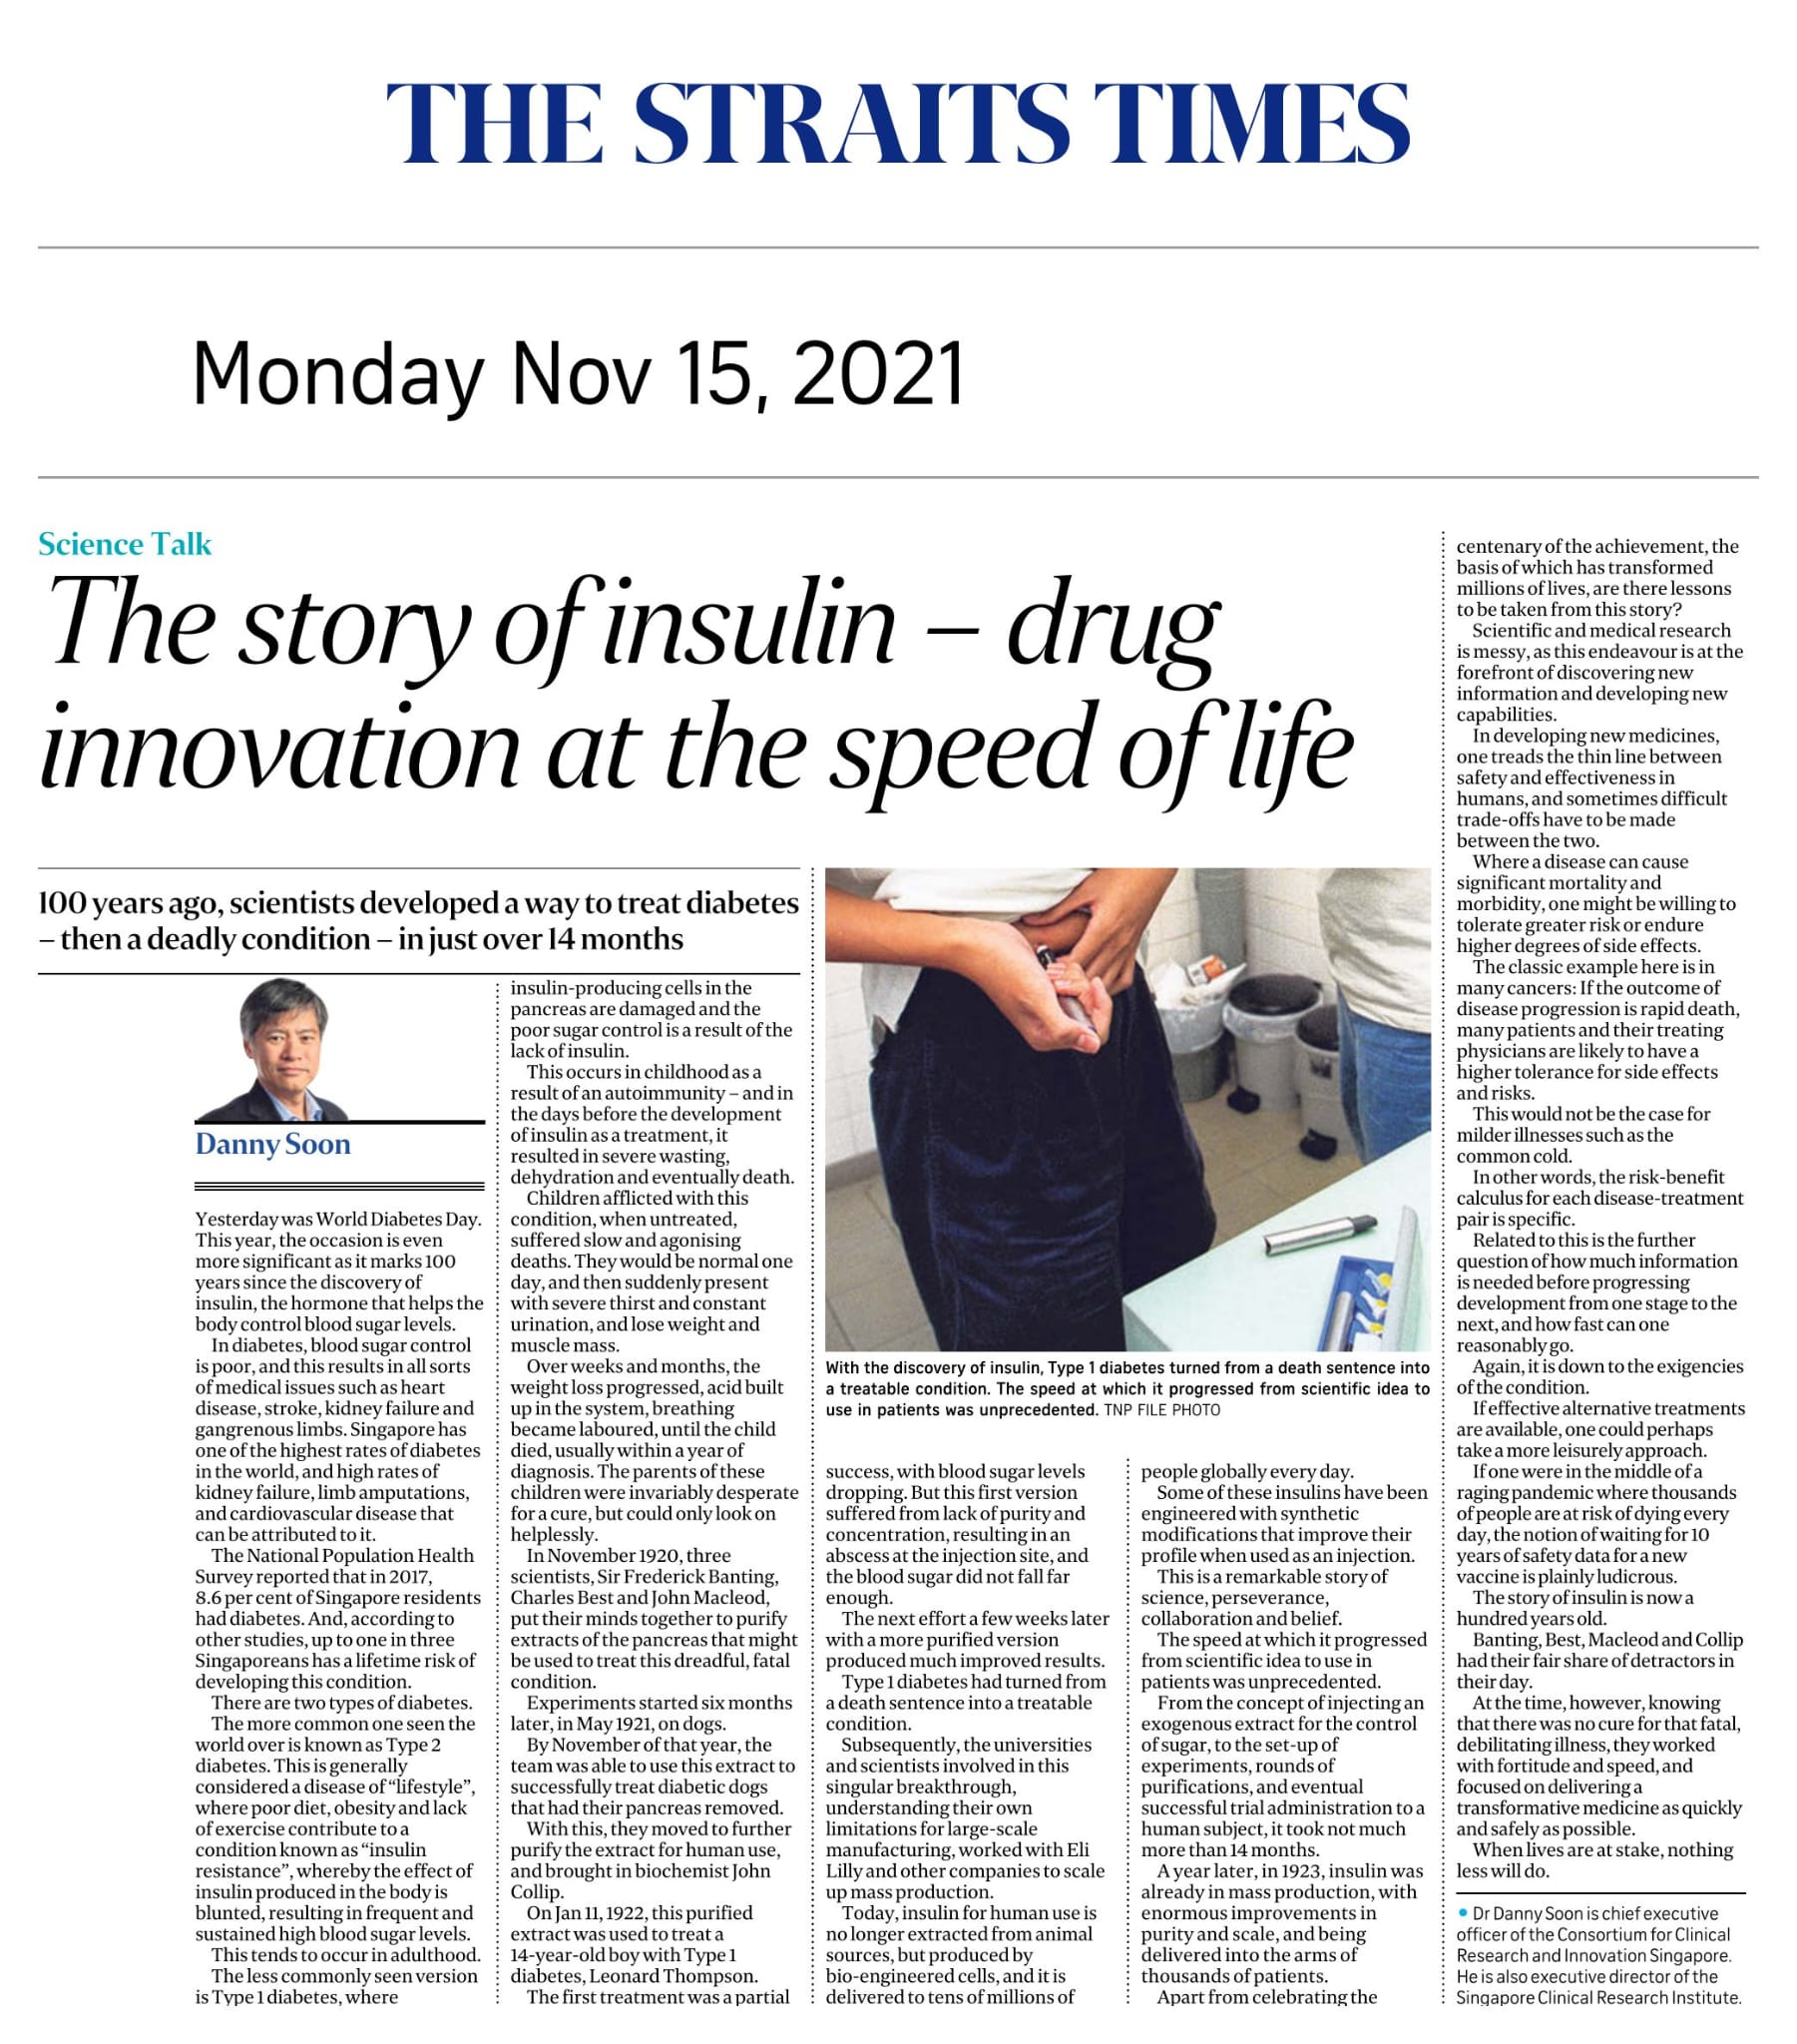 The Story of Insulin, Drug Innovation at The Speed of Life - Published in The Straits Times Nov 15, 2021